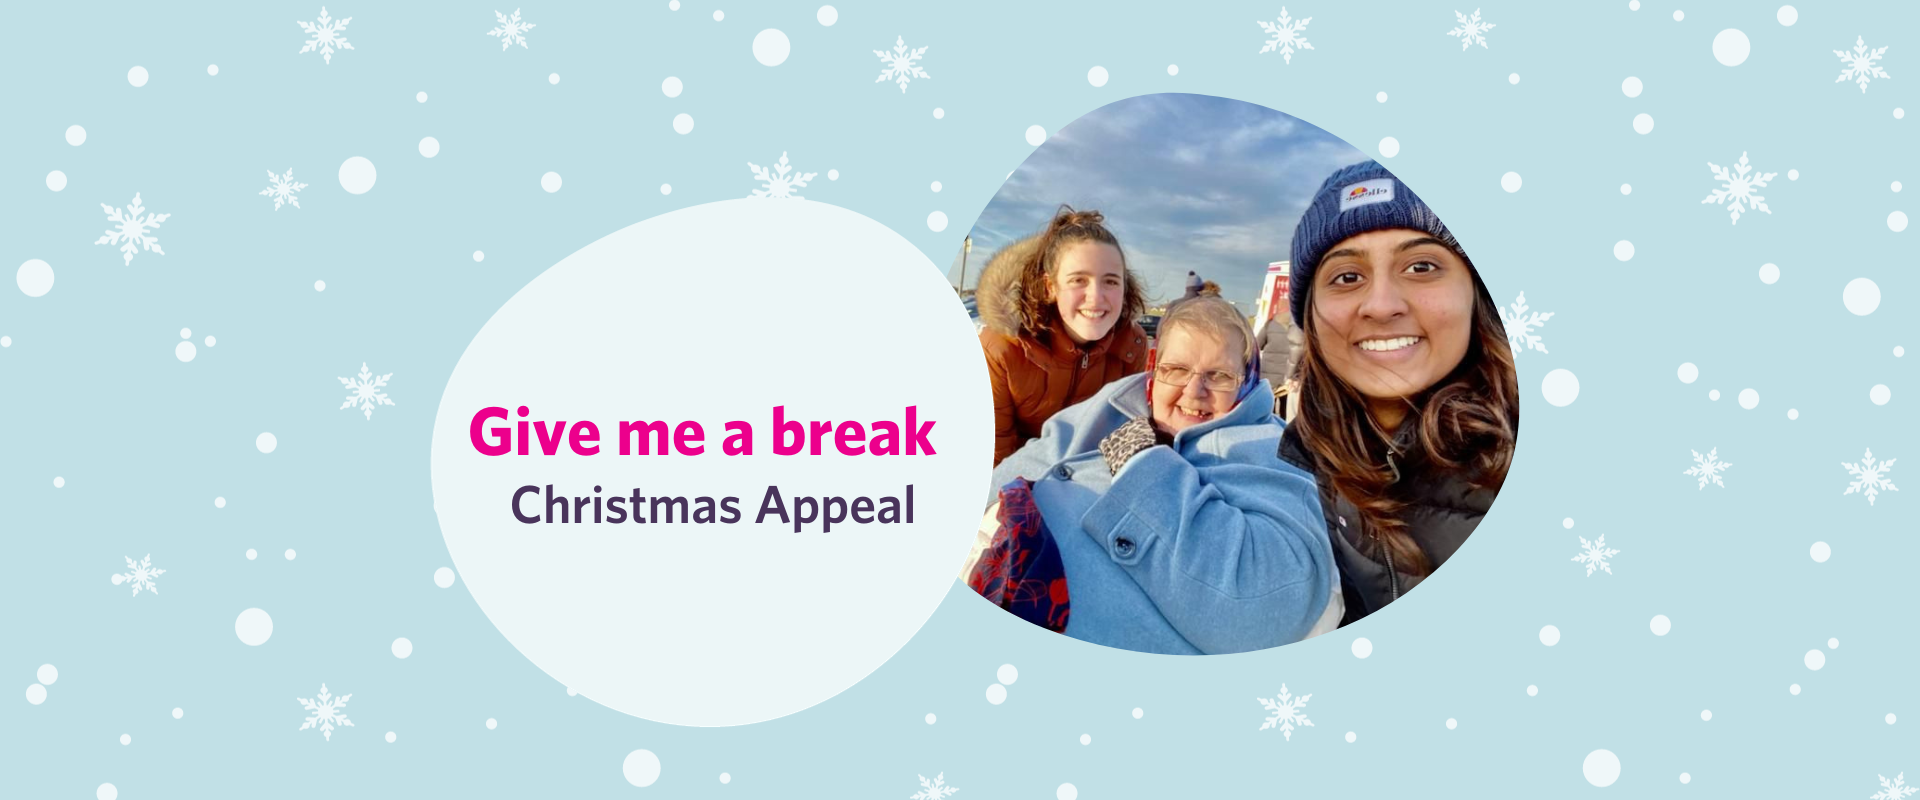 Graphic image with sky blue background and white snowflakes. Overlaid are two bubbles. The left has text reading Give me a break Christmas Appeal. In the right bubble is an image of a disabled woman and two young female volunteers taking a selfie with her.